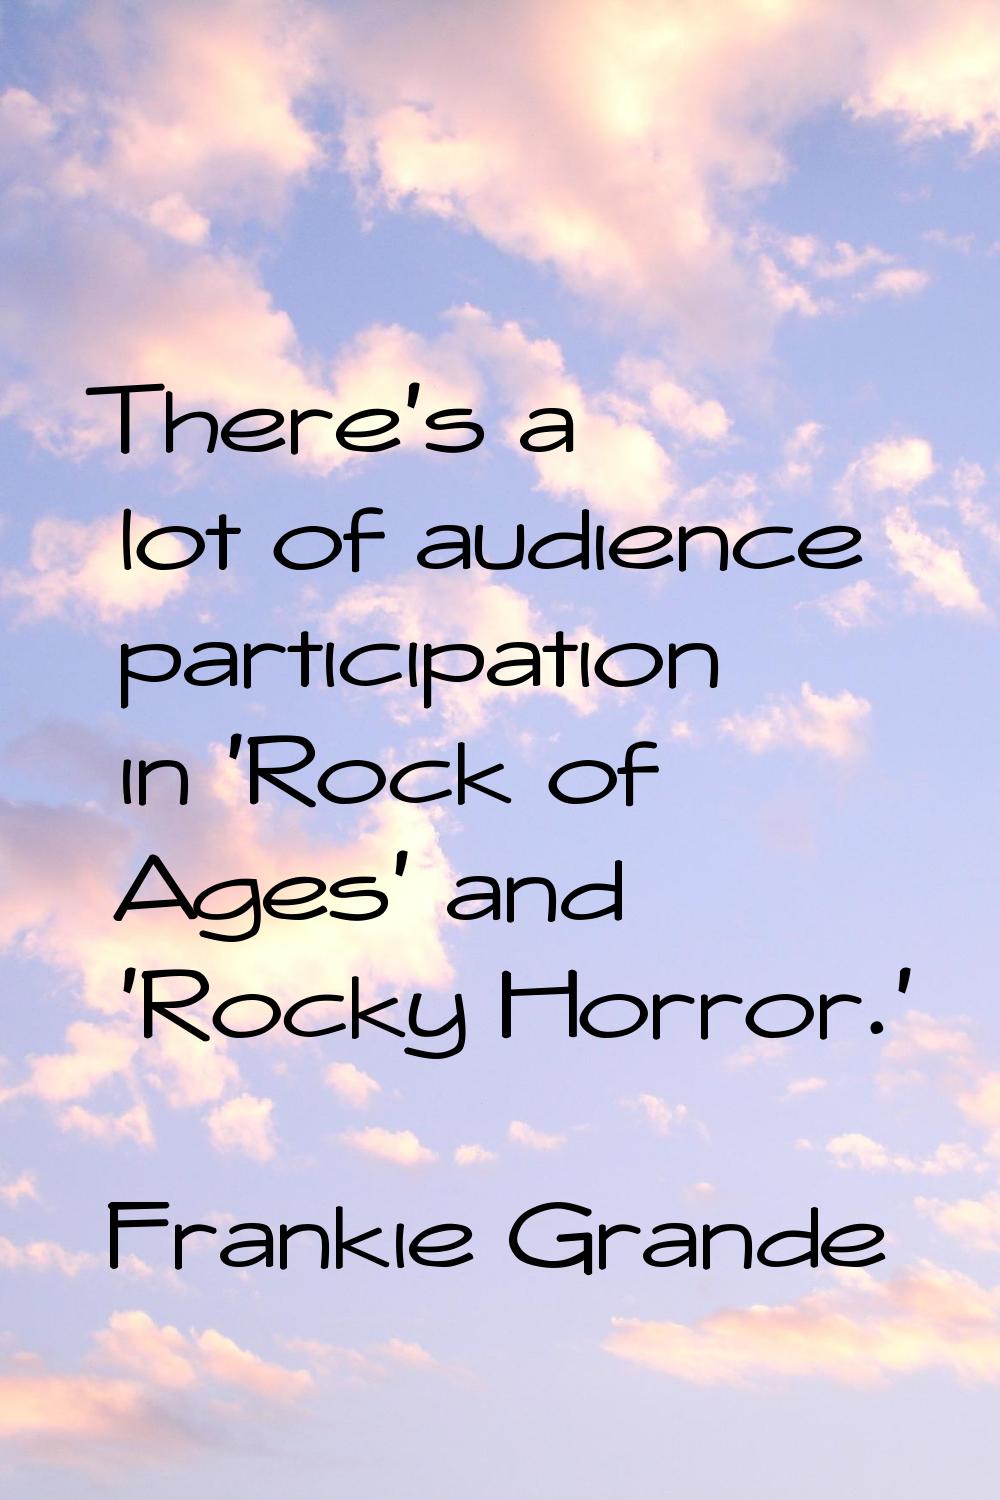 There's a lot of audience participation in 'Rock of Ages' and 'Rocky Horror.'